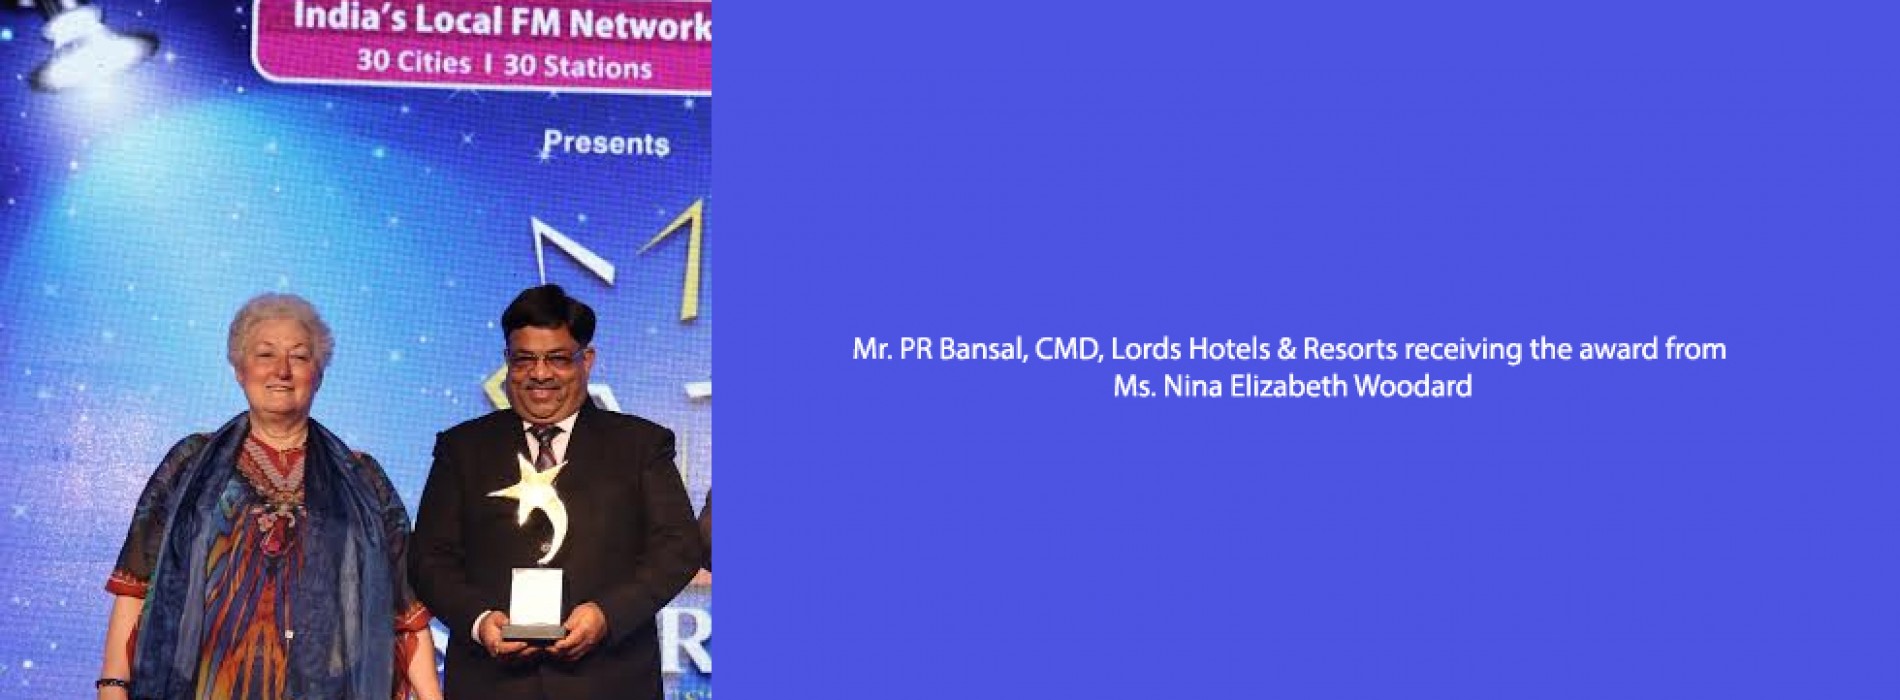 Lords Hotels & Resorts awarded the ‘Best Mid-Market Hotel Chain’ for the 2nd consecutive year